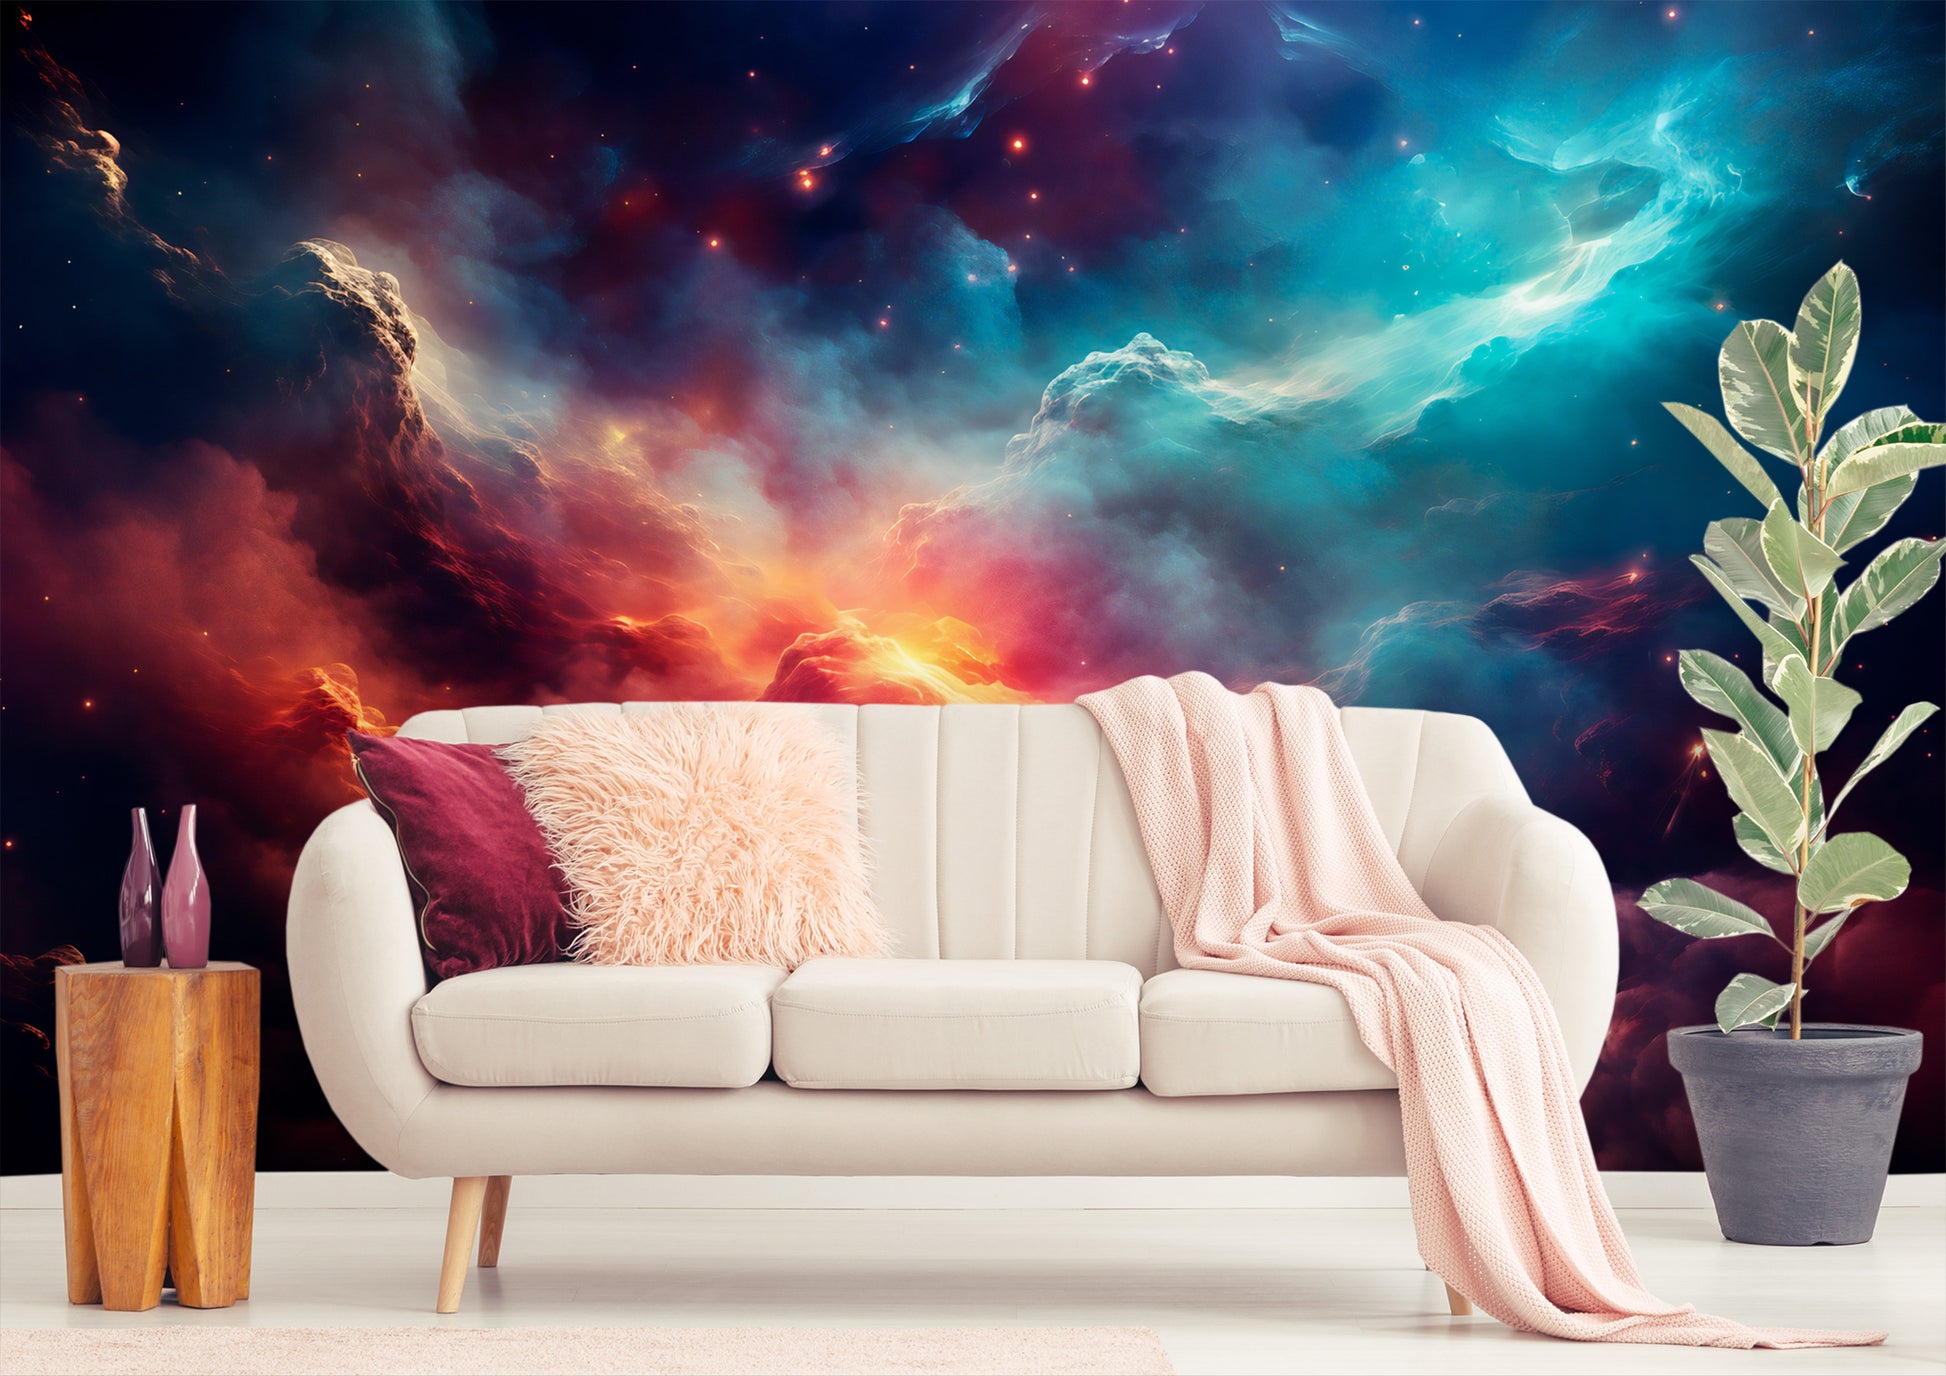 Astronomy Inspired Wall Decor with Deep Space Wall